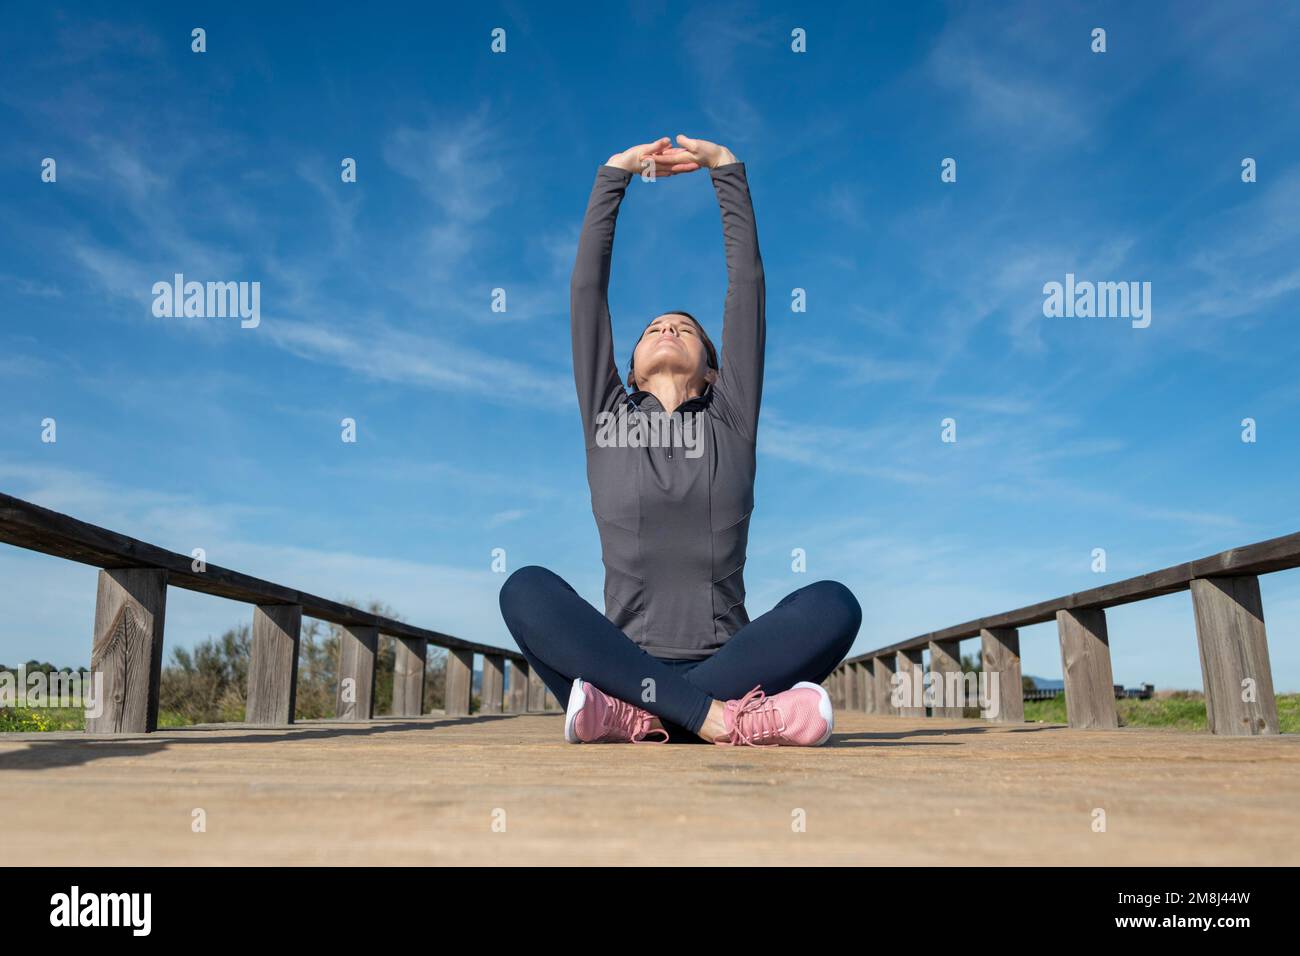 Sporty woman sitting cross legged doing an arm stretch warm up exercise. Stock Photo